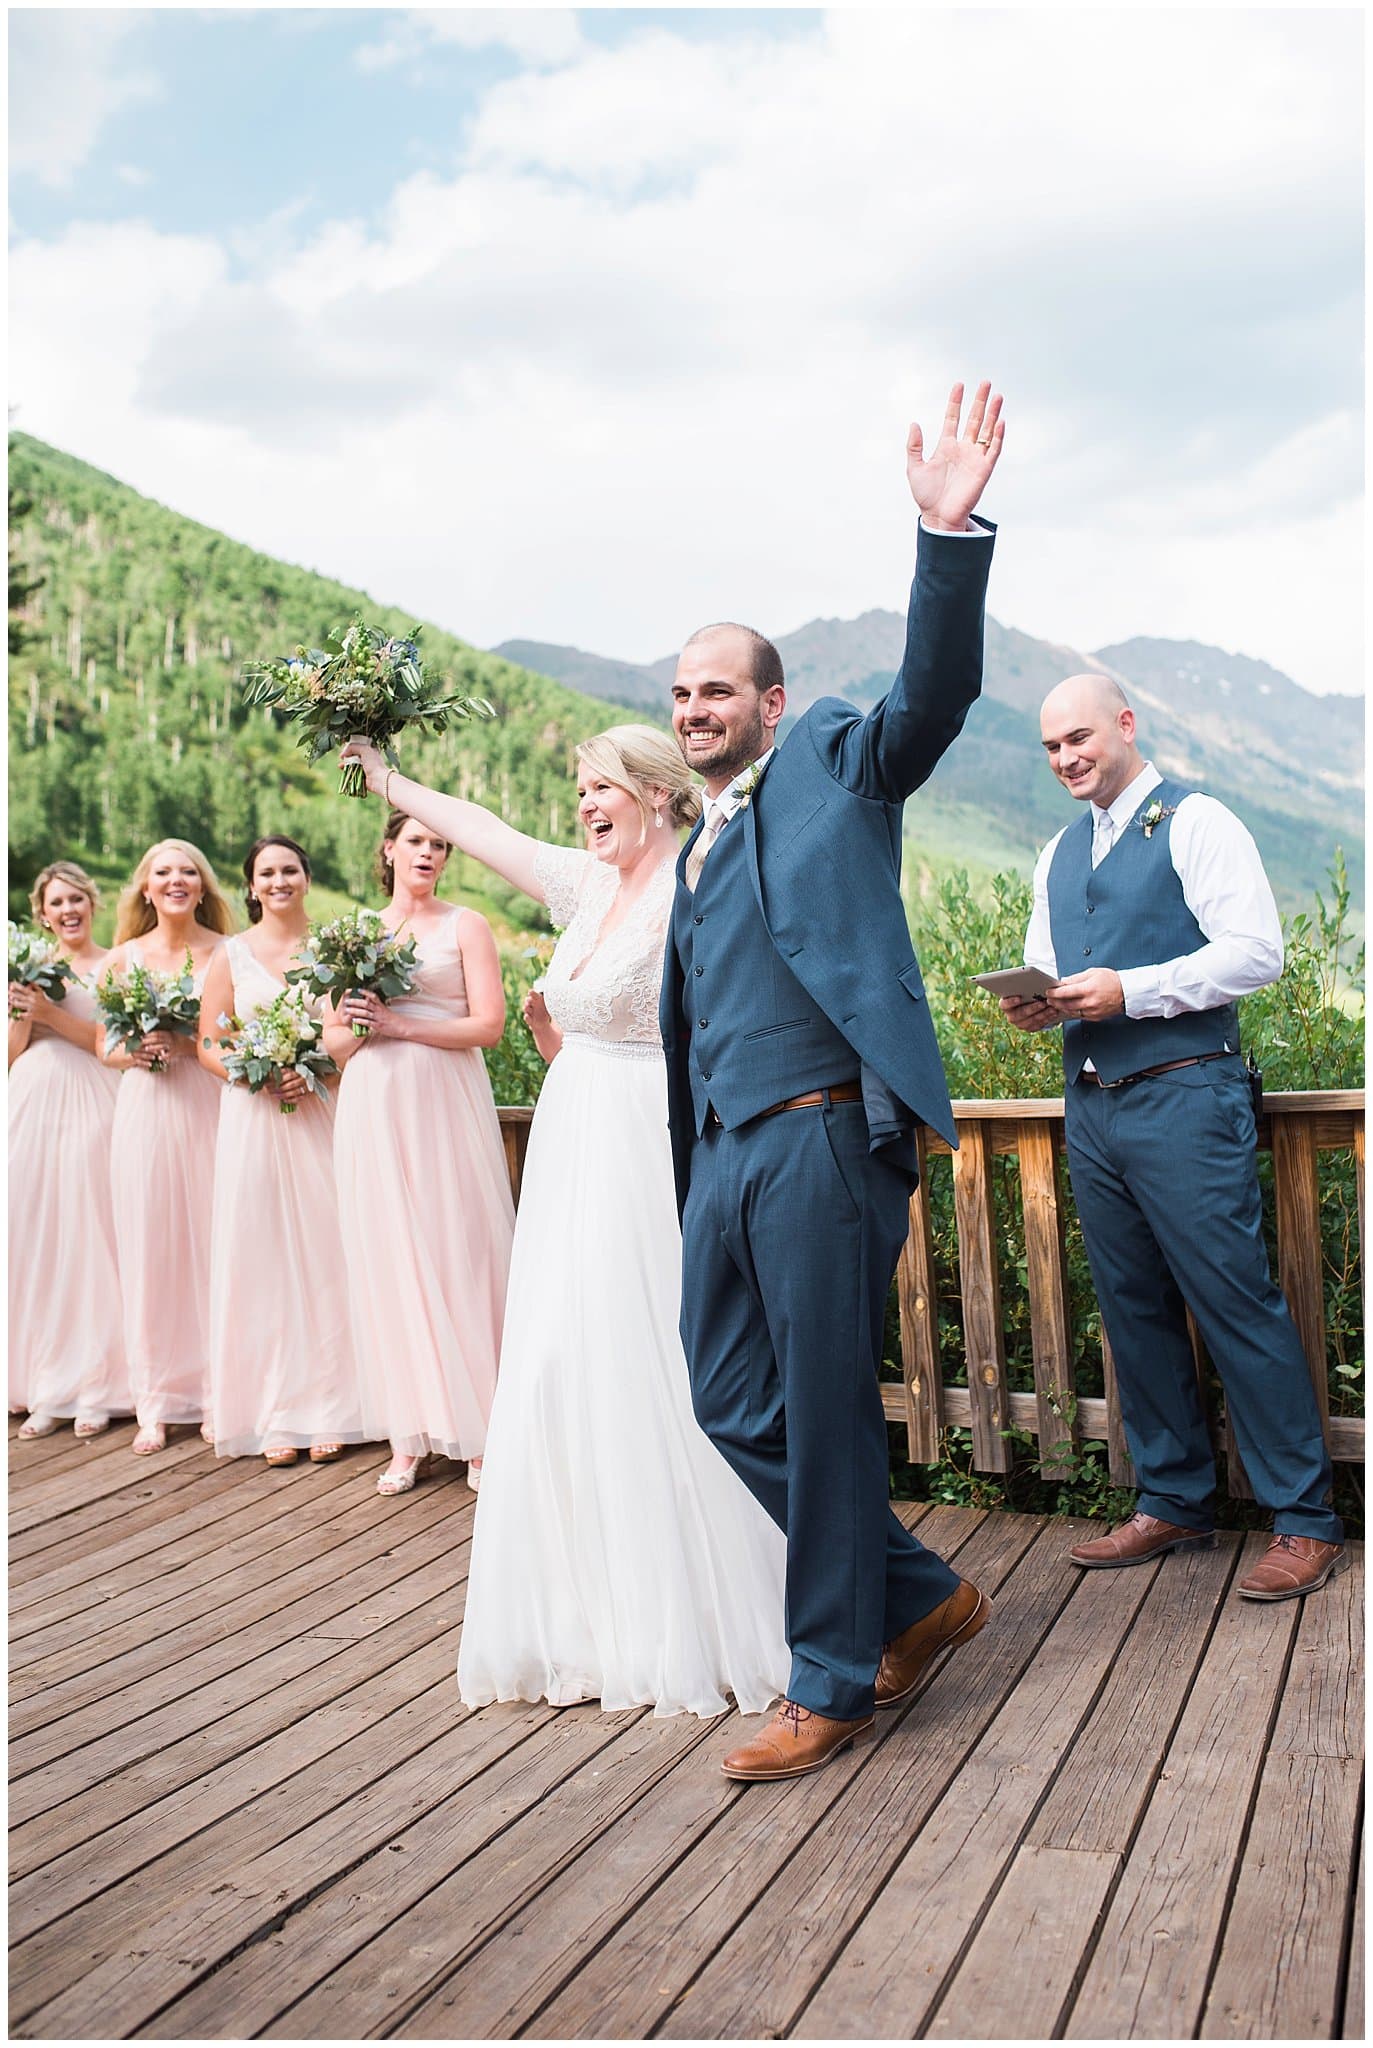 bride and groom cheering after wedding ceremony at Piney River Ranch wedding by Vail wedding photographer Jennie Crate photographer